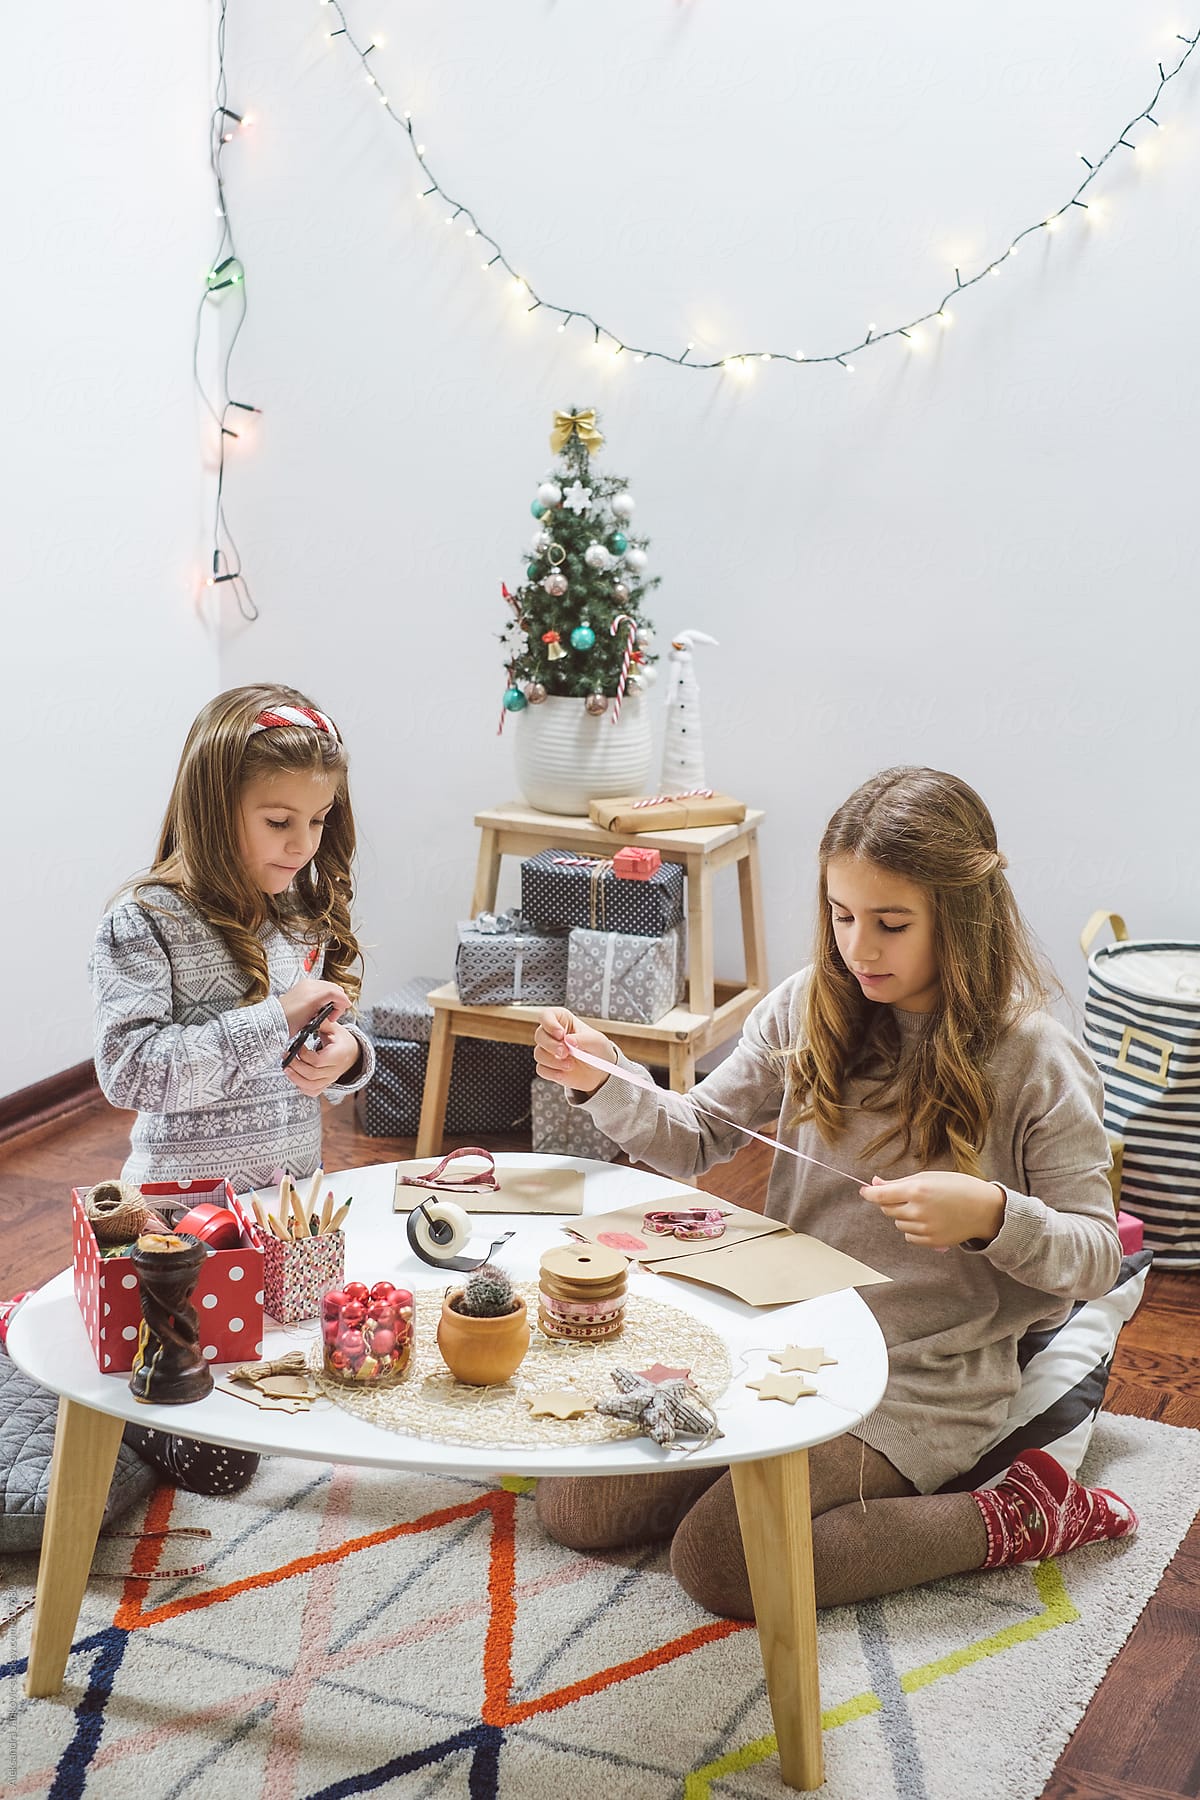 Children Making Christmas Cards At Home